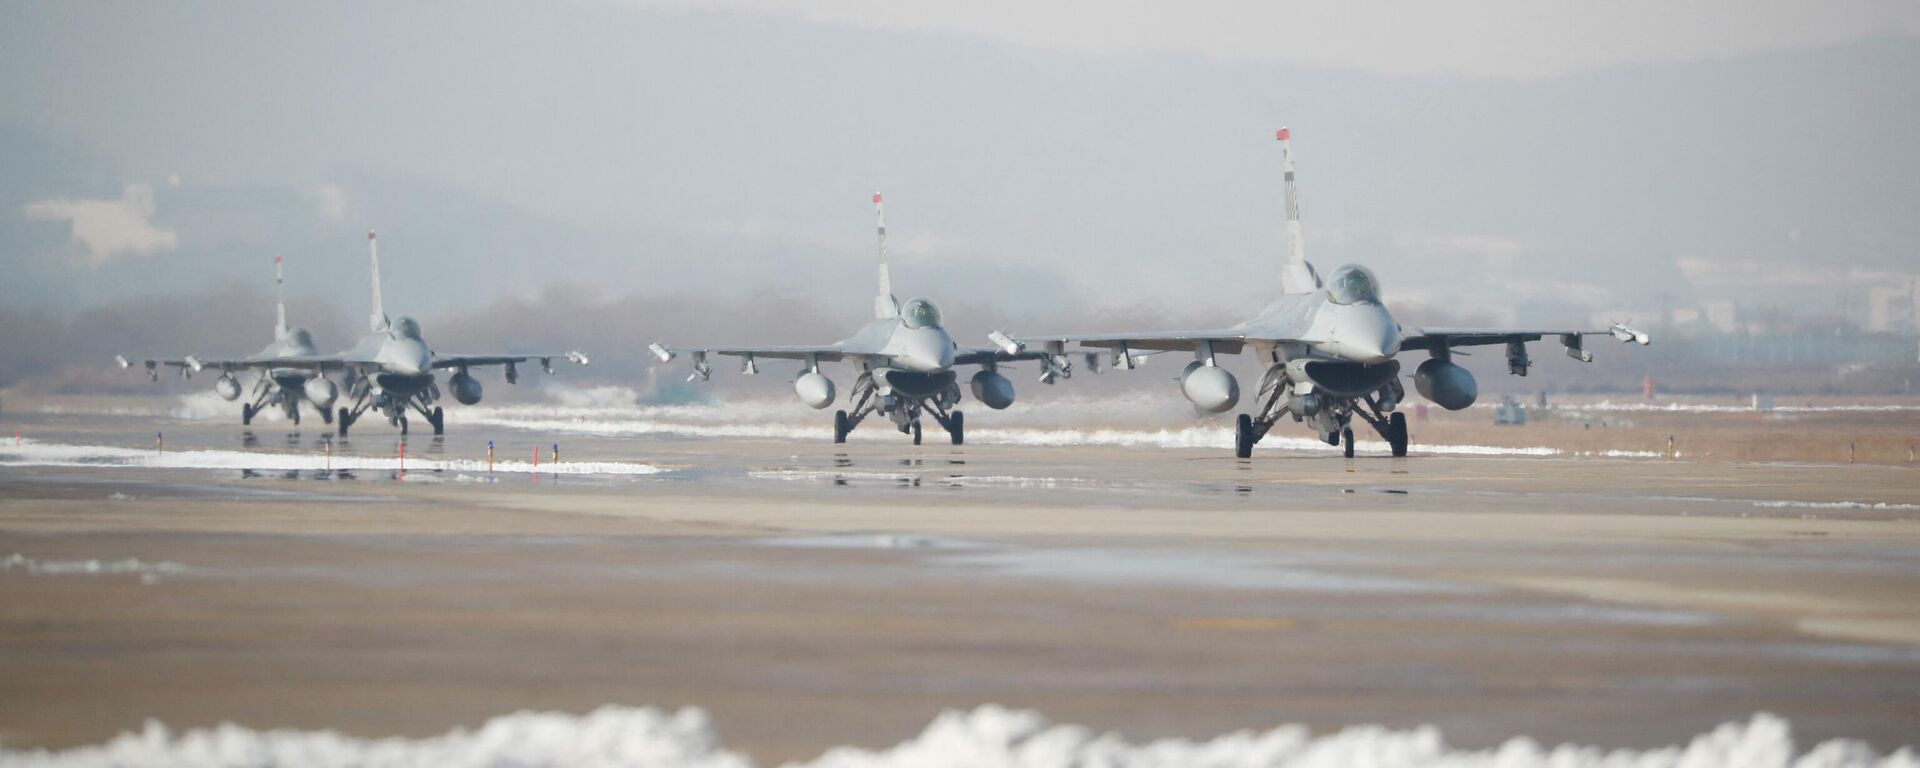 US Air Force F-16 fighter jets take part in a joint aerial drills called 'Vigilant Ace' between the US and South Korea at the Osan Air Base in Pyeongtaek on December 6, 2017. - Sputnik International, 1920, 03.11.2022